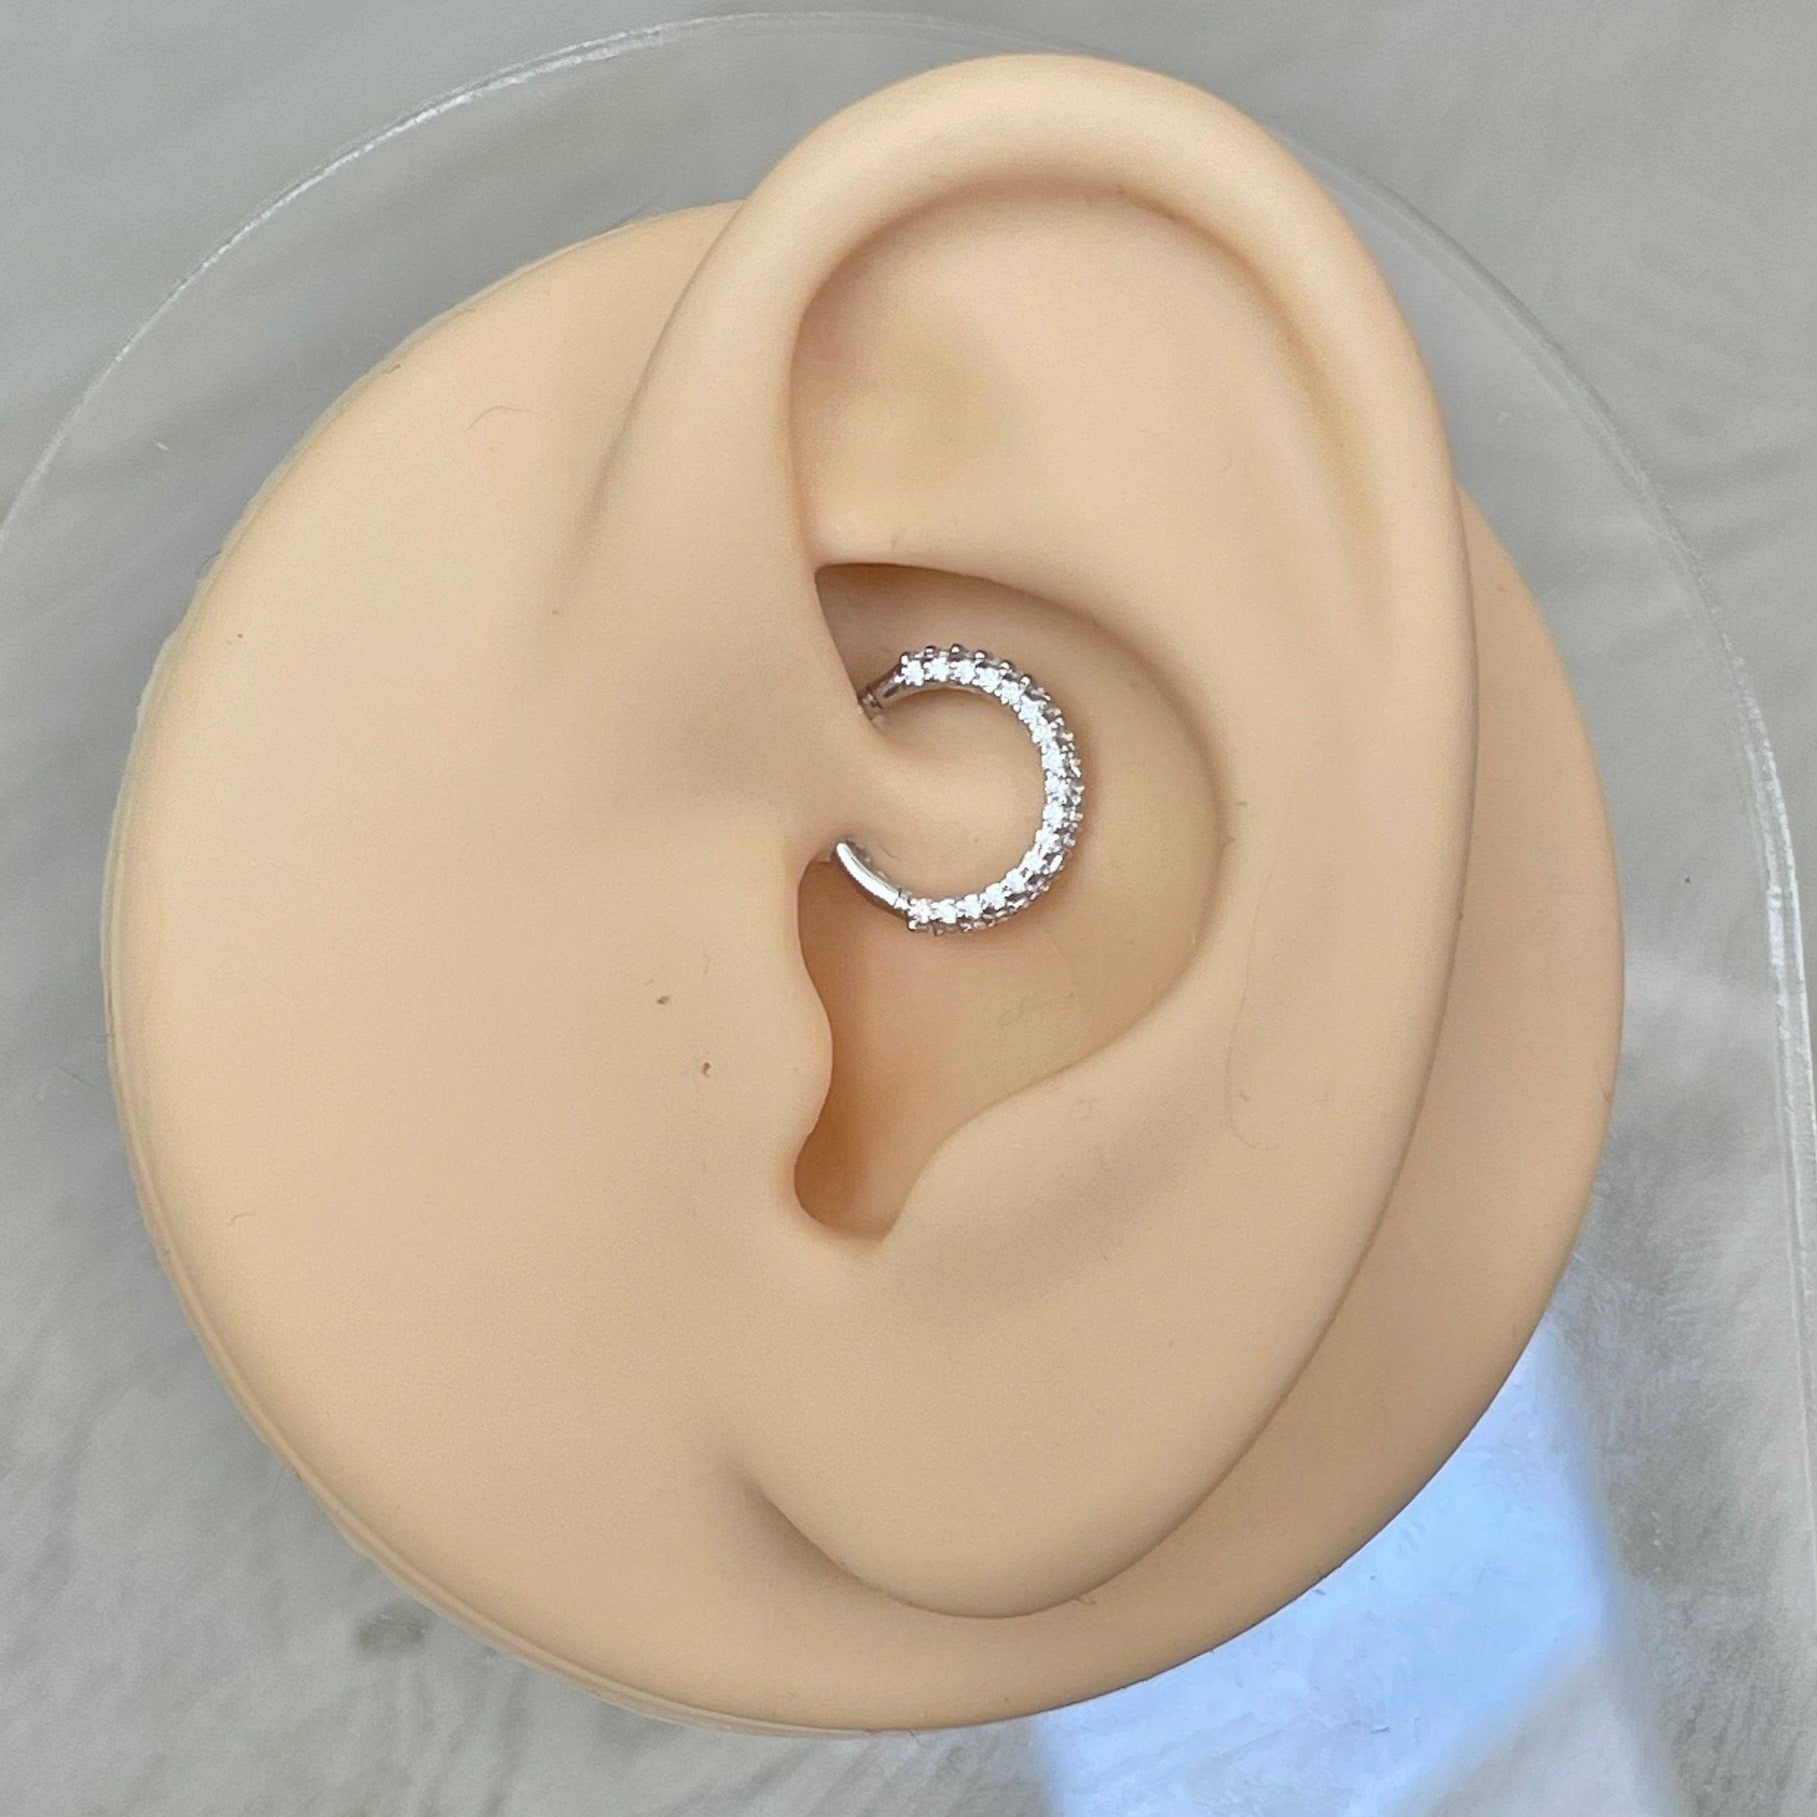 Solid White Gold CZ Daith Earring (16G, 8mm or 10mm, Solid White or Yellow Gold)